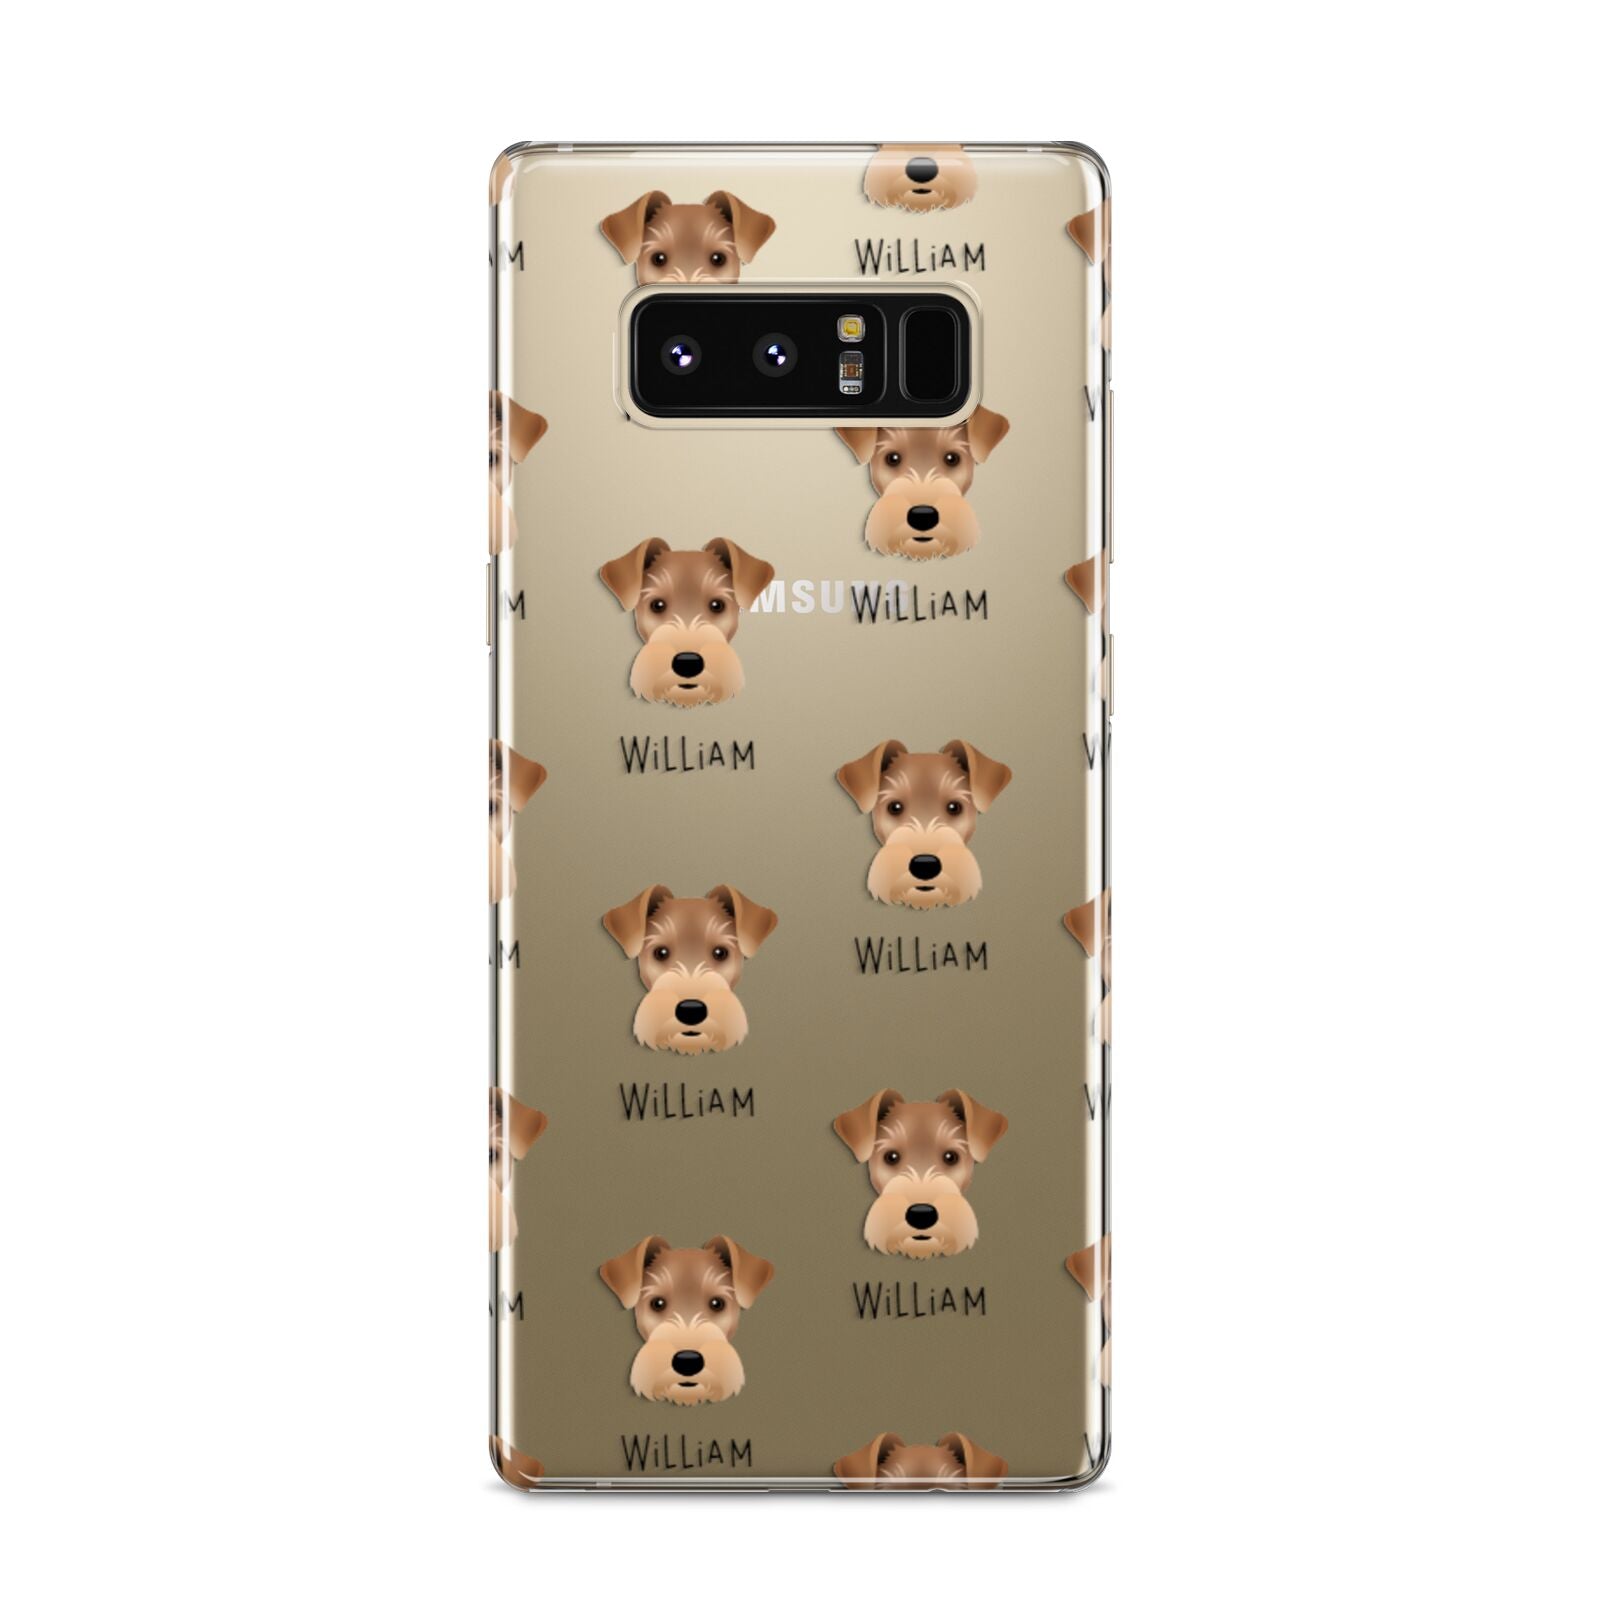 Welsh Terrier Icon with Name Samsung Galaxy S8 Case